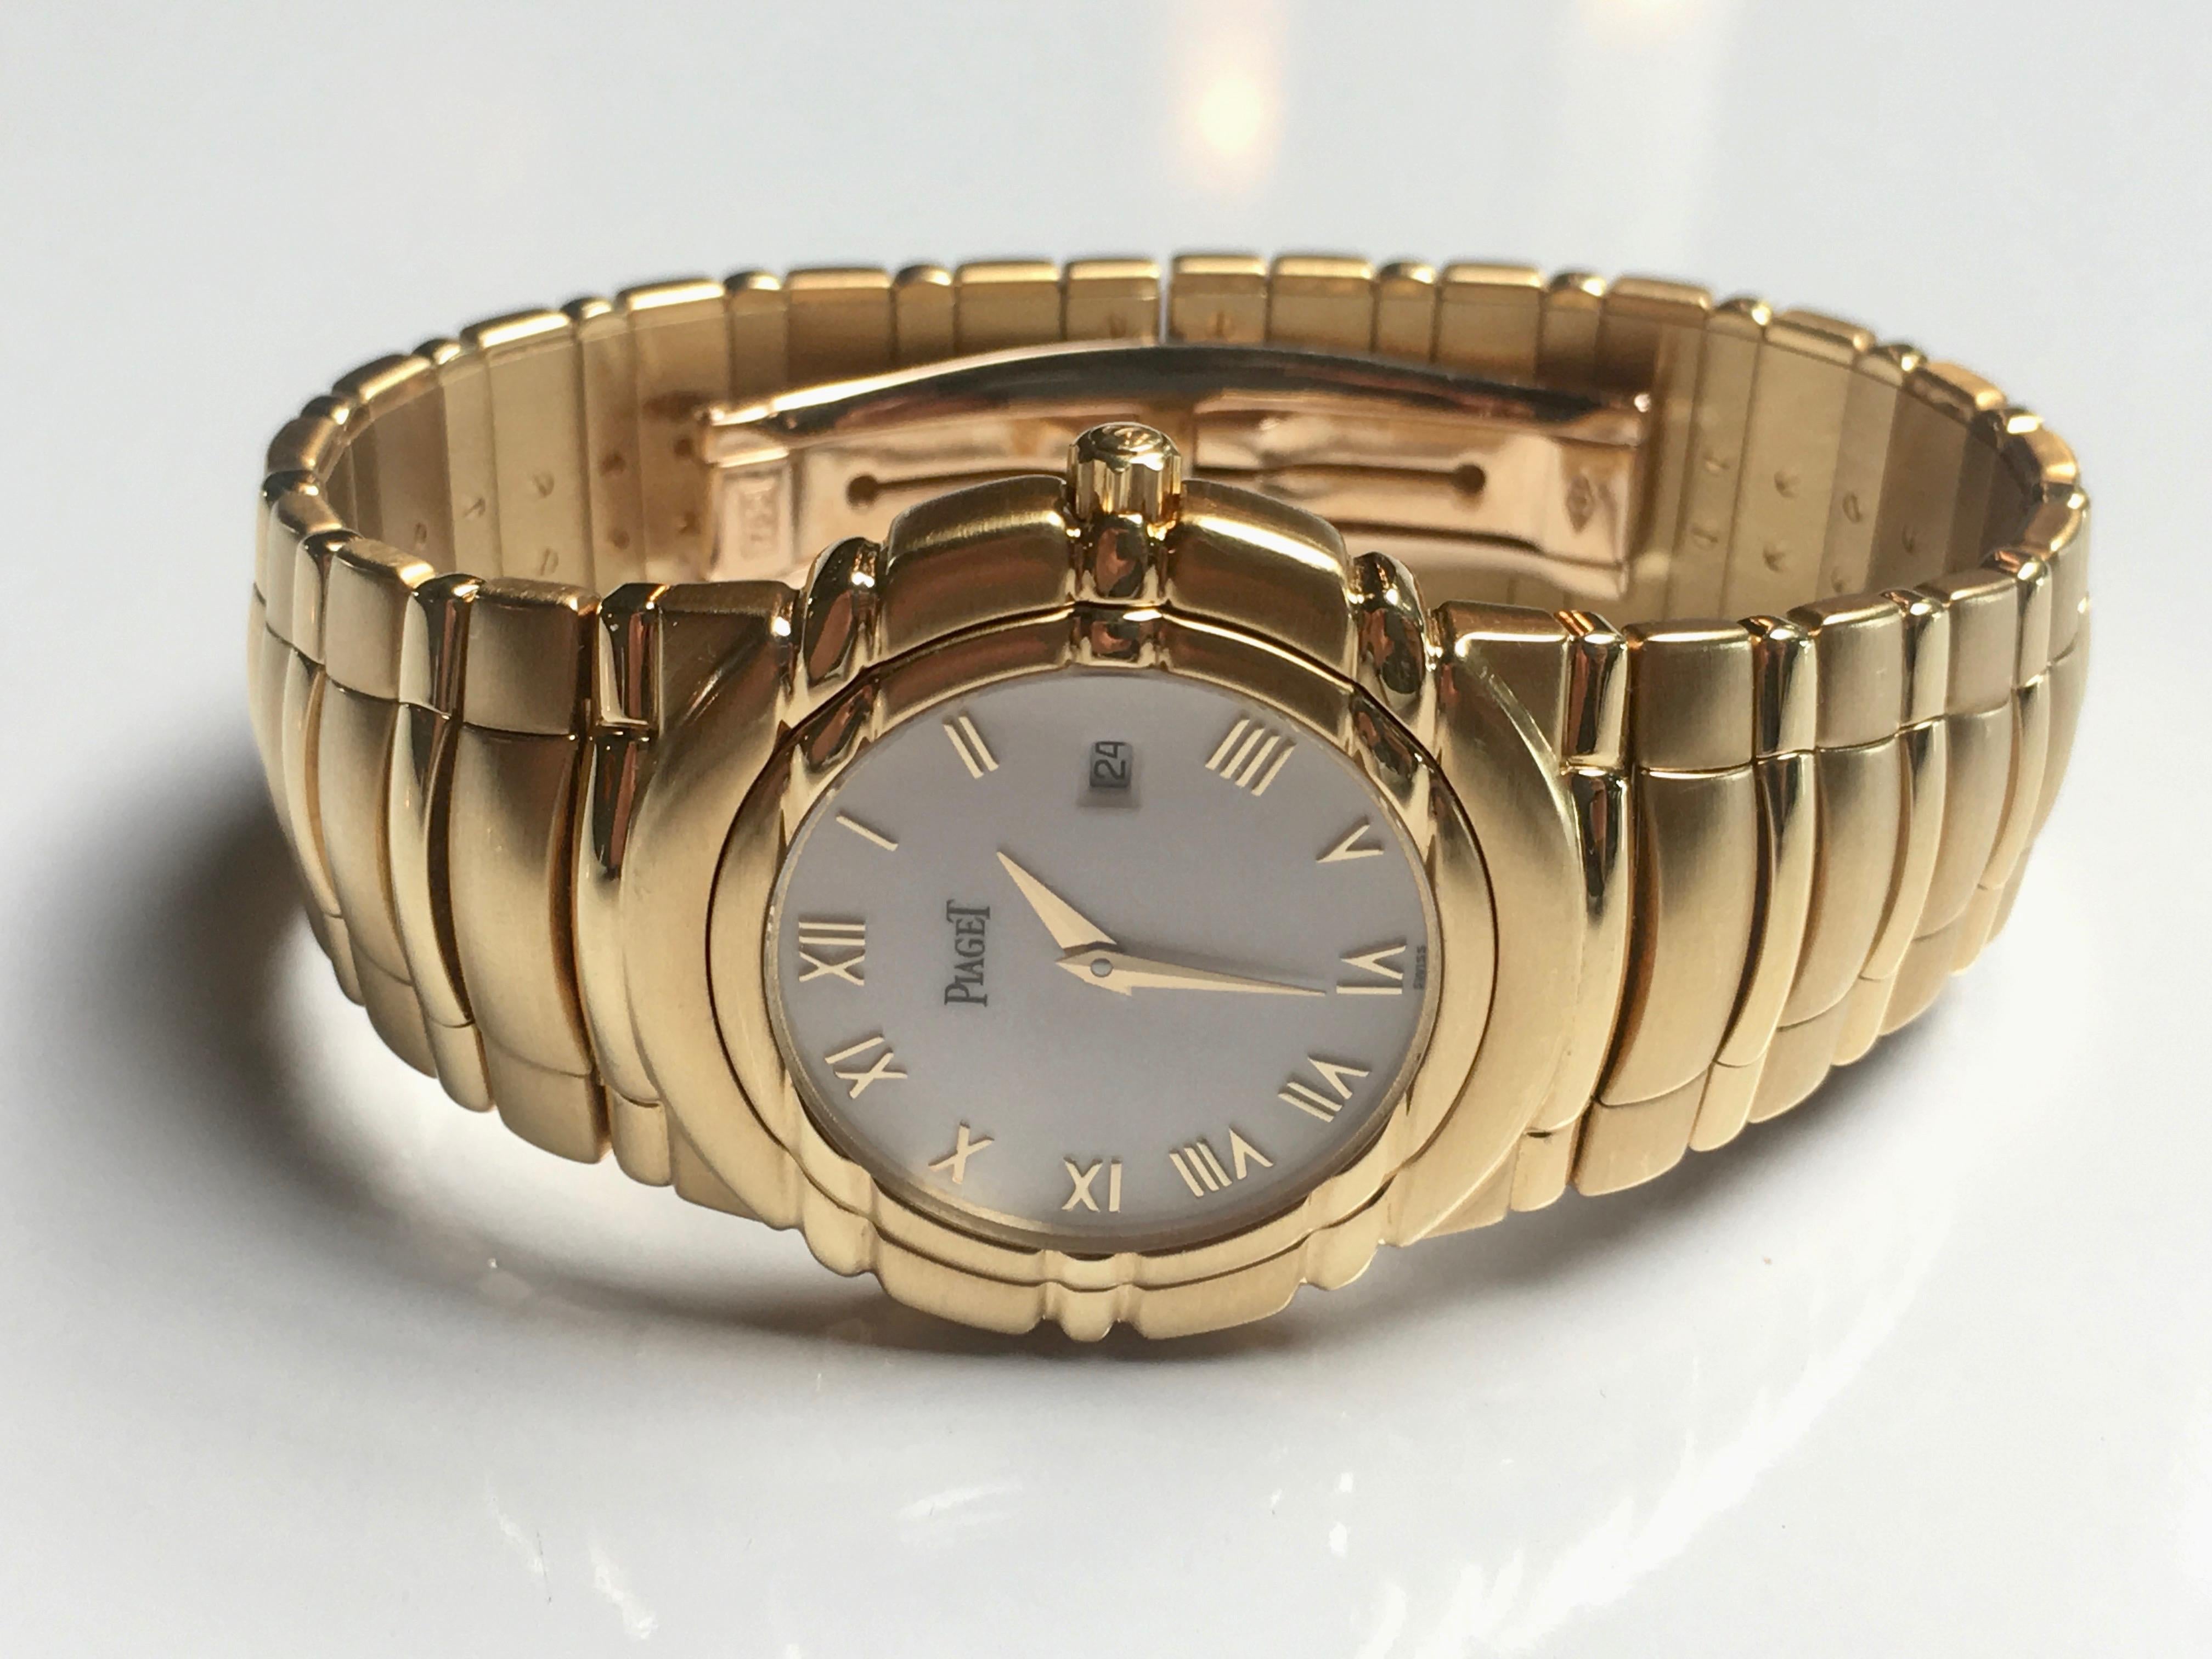 Gold Piaget Tanagra Midsize watch from 1993. Model 17141. 18K Yellow gold case and bracelet with hidden clasp, white Roman dial, quartz movement. 33mm, M 411D. Certificate of authenticity, with original purchase date and blue booklet. No box. Newly